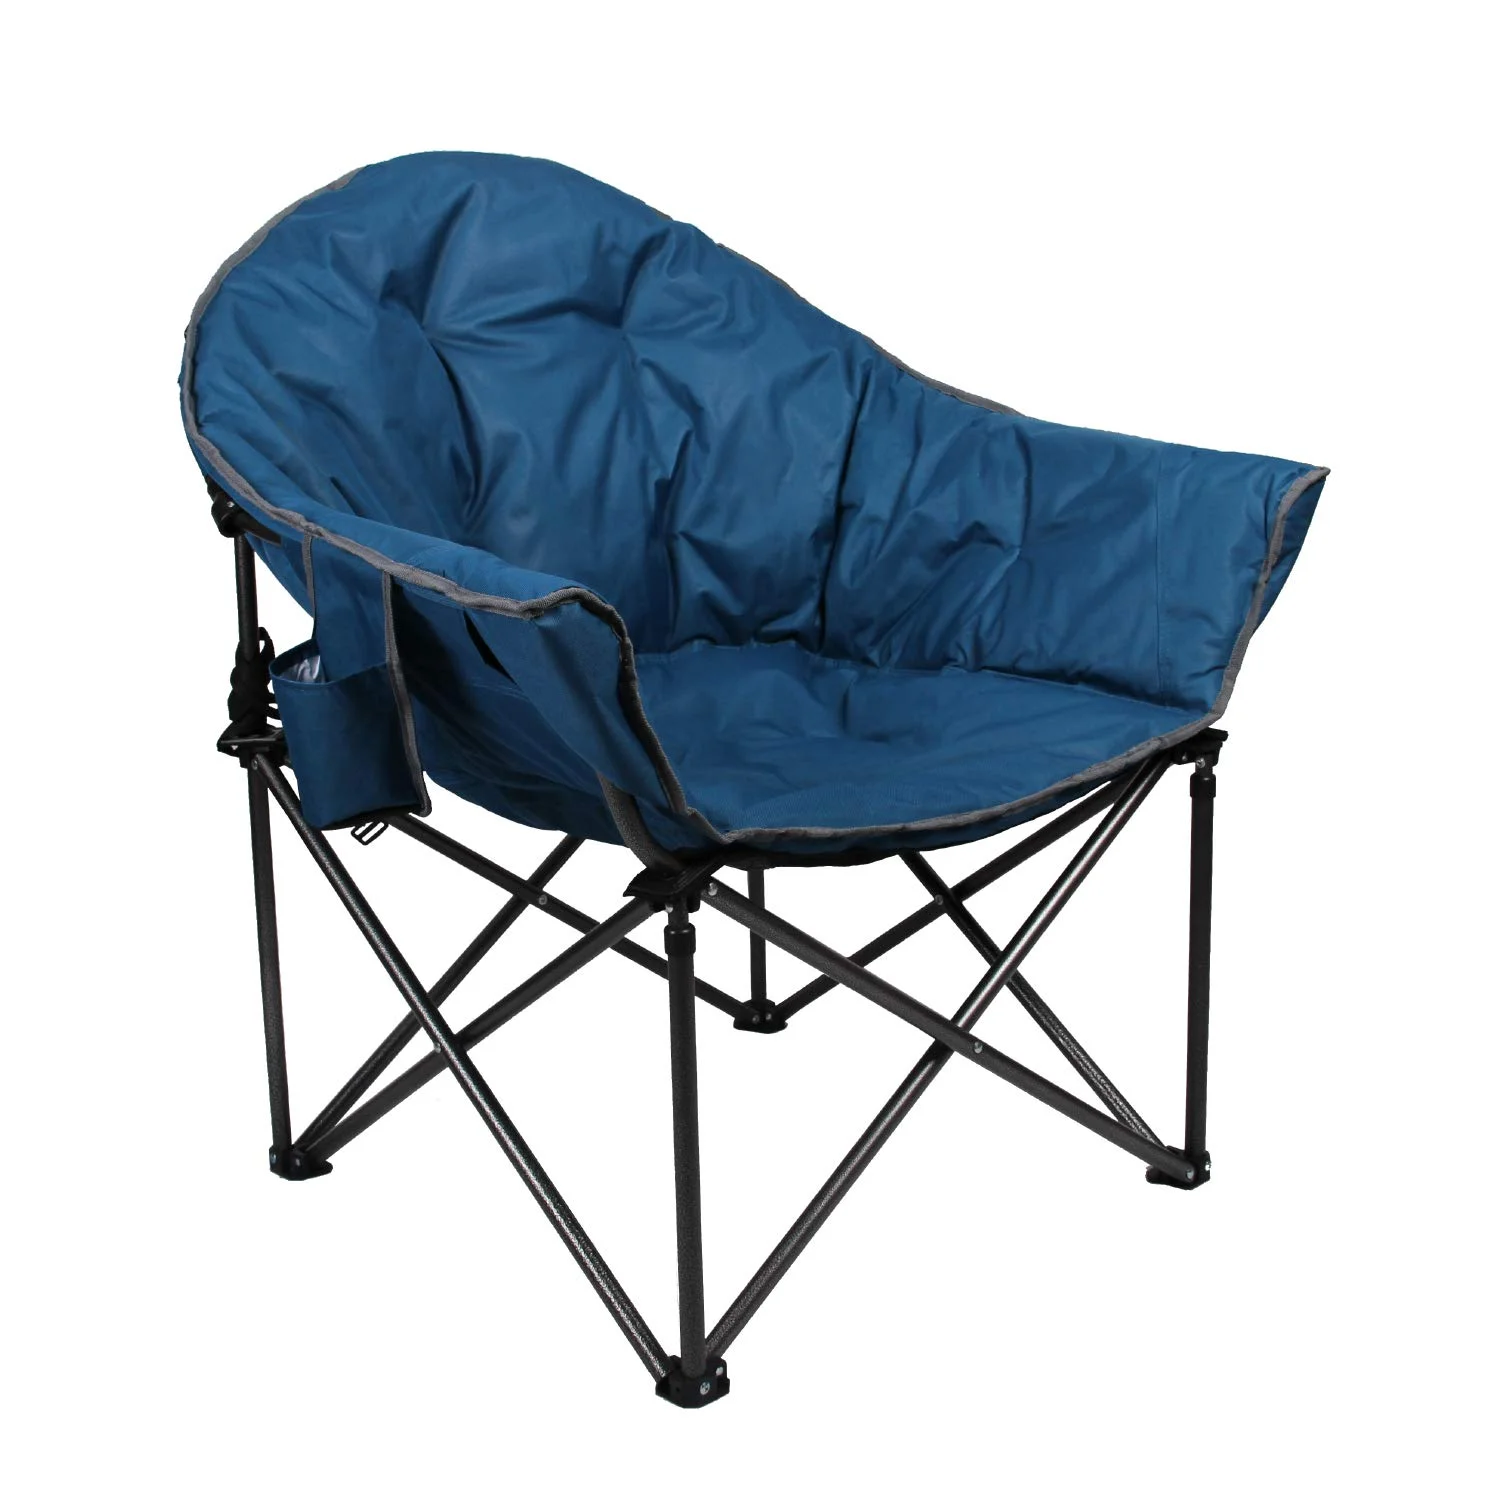 ALPHA + ALPHA CAMP Oversized Camping Chairs Padded Moon Round Chair Saucer  Recliner Supports 400 lbs with Folding Cup Holder and Carry Bag